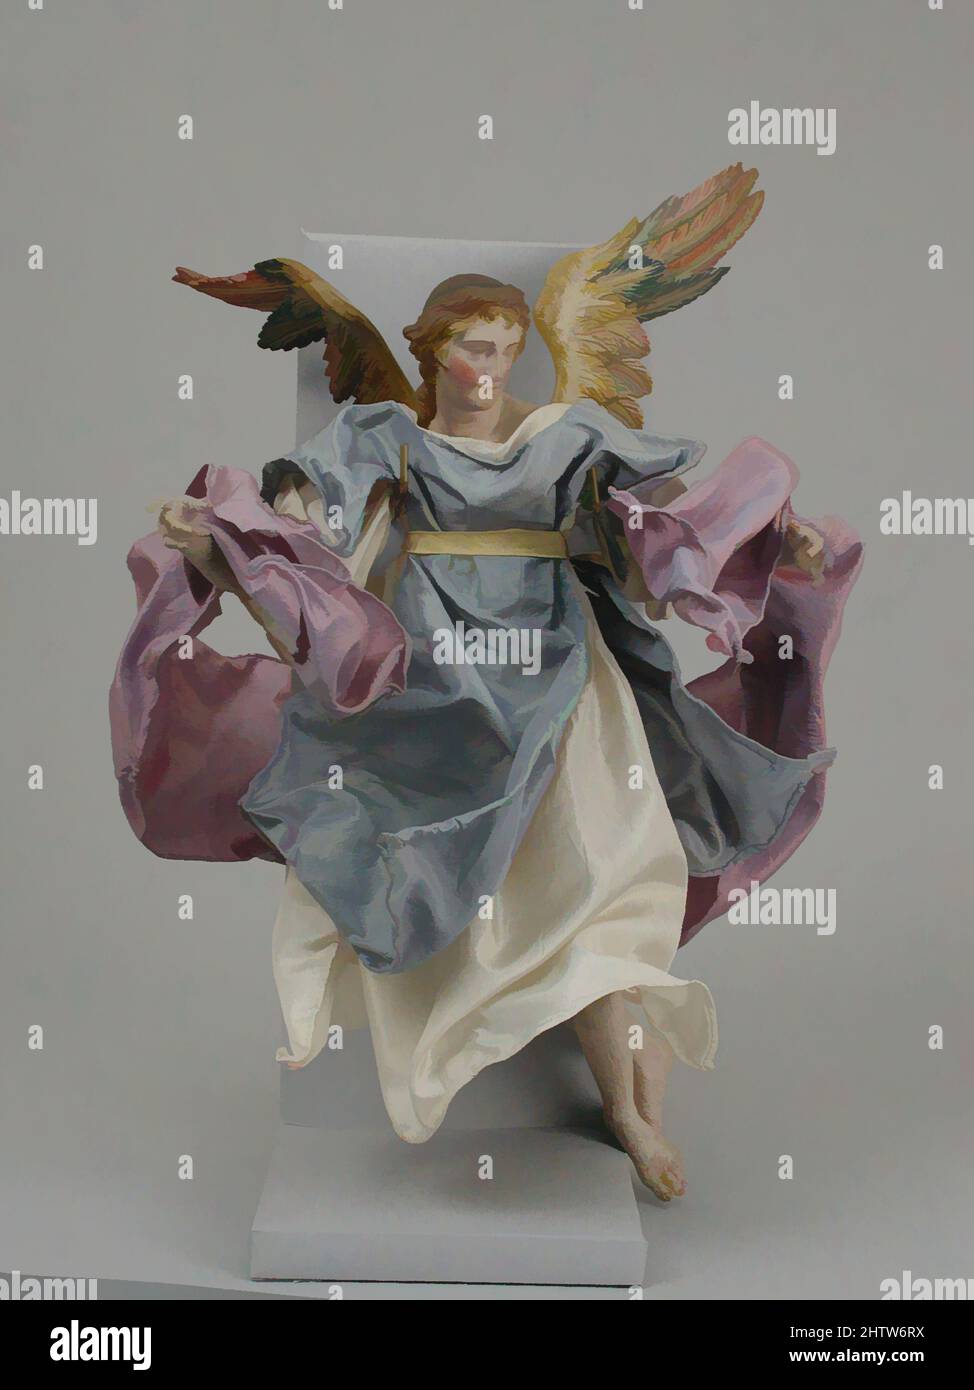 Art inspired by Angel, second half 18th century, Italian, Naples, Polychromed terracotta head; wooden limbs and wings; body of wire wrapped in tow; various fabrics, H. 15 in. (38.1 cm.), Crèche, Classic works modernized by Artotop with a splash of modernity. Shapes, color and value, eye-catching visual impact on art. Emotions through freedom of artworks in a contemporary way. A timeless message pursuing a wildly creative new direction. Artists turning to the digital medium and creating the Artotop NFT Stock Photo